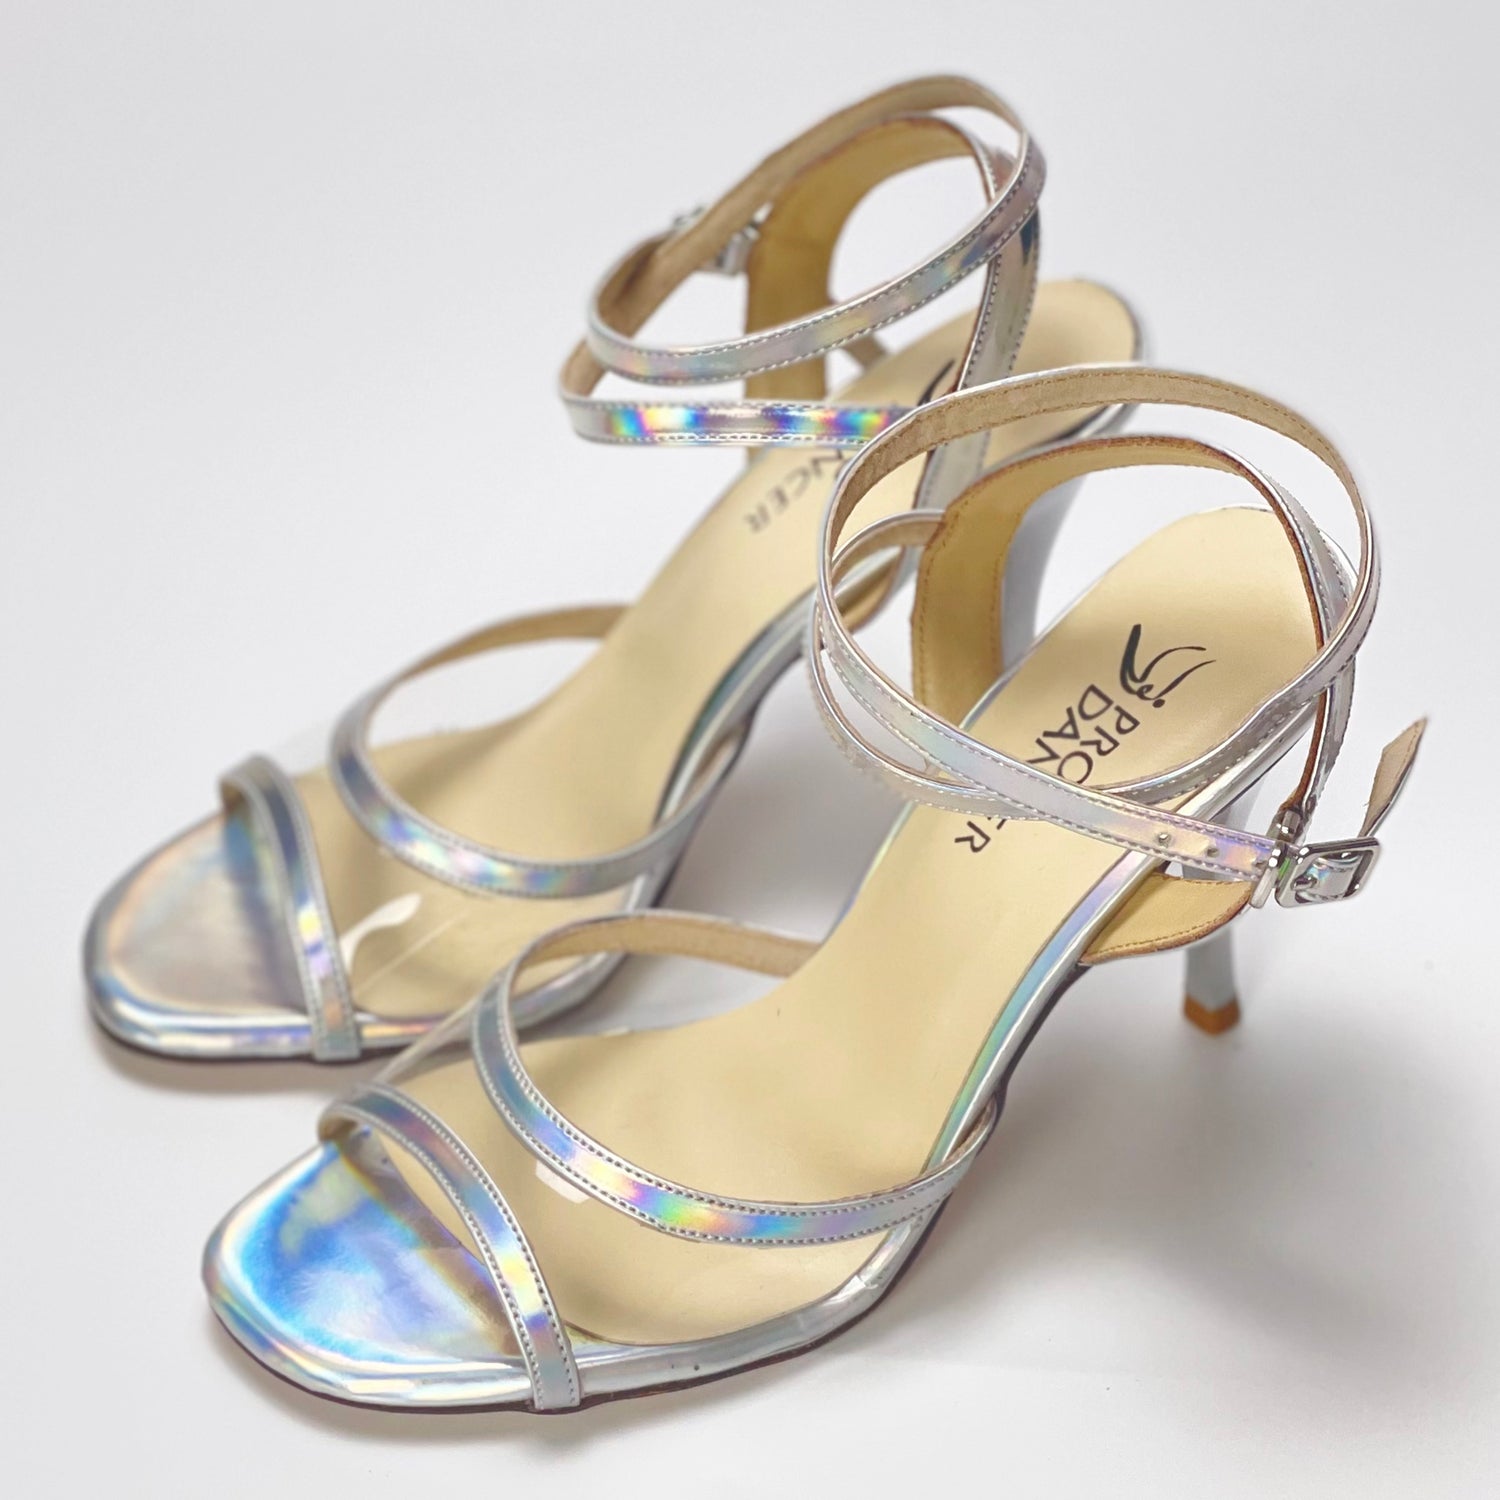 Pro Dancer Tango Argentino high heel dance sandals with leather sole in silver (PD-9062B)1